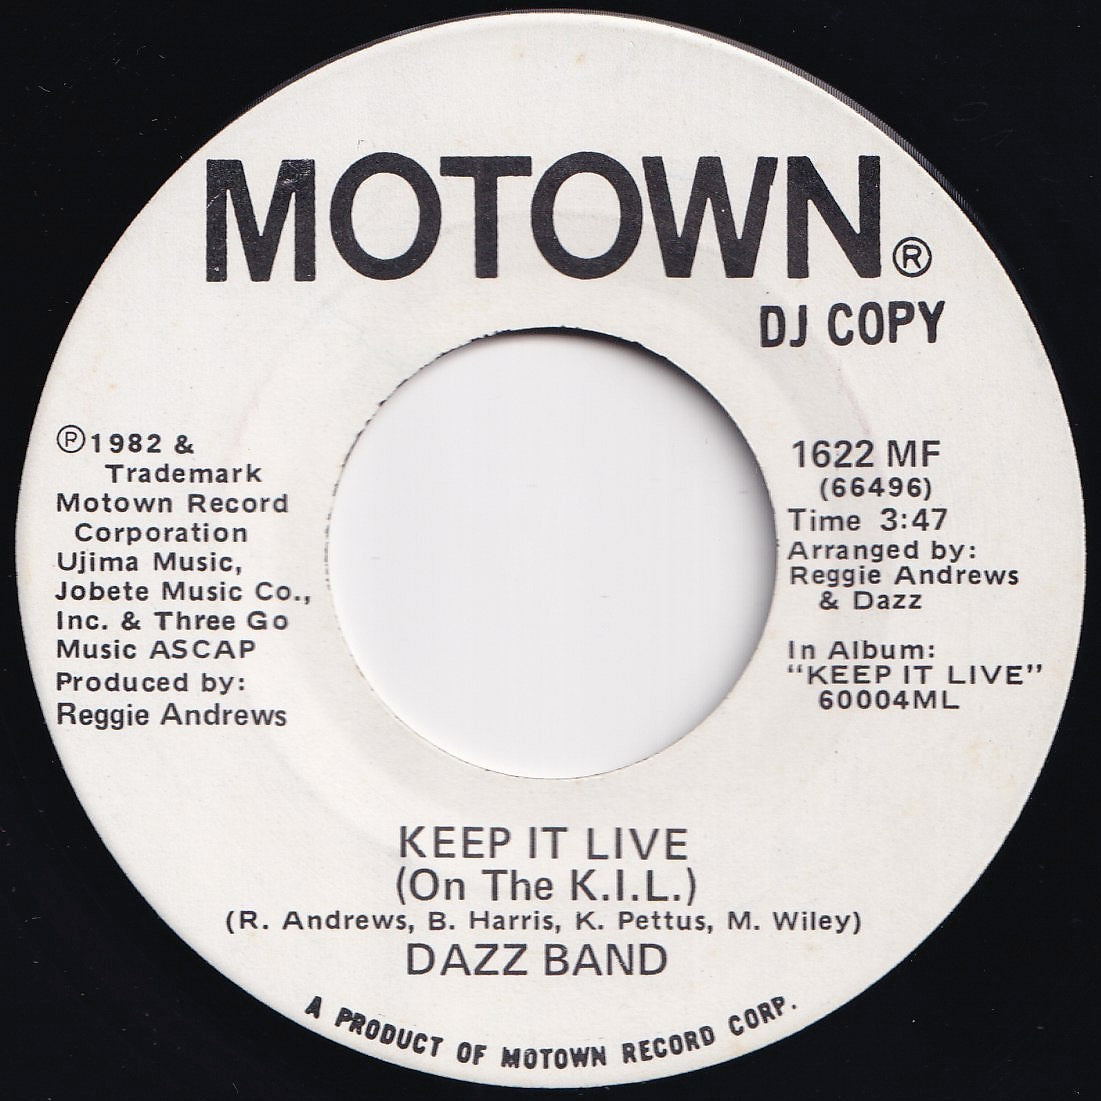 Dazz Band - Keep It Live (On The K.I.L.) / Keep It Live (On The